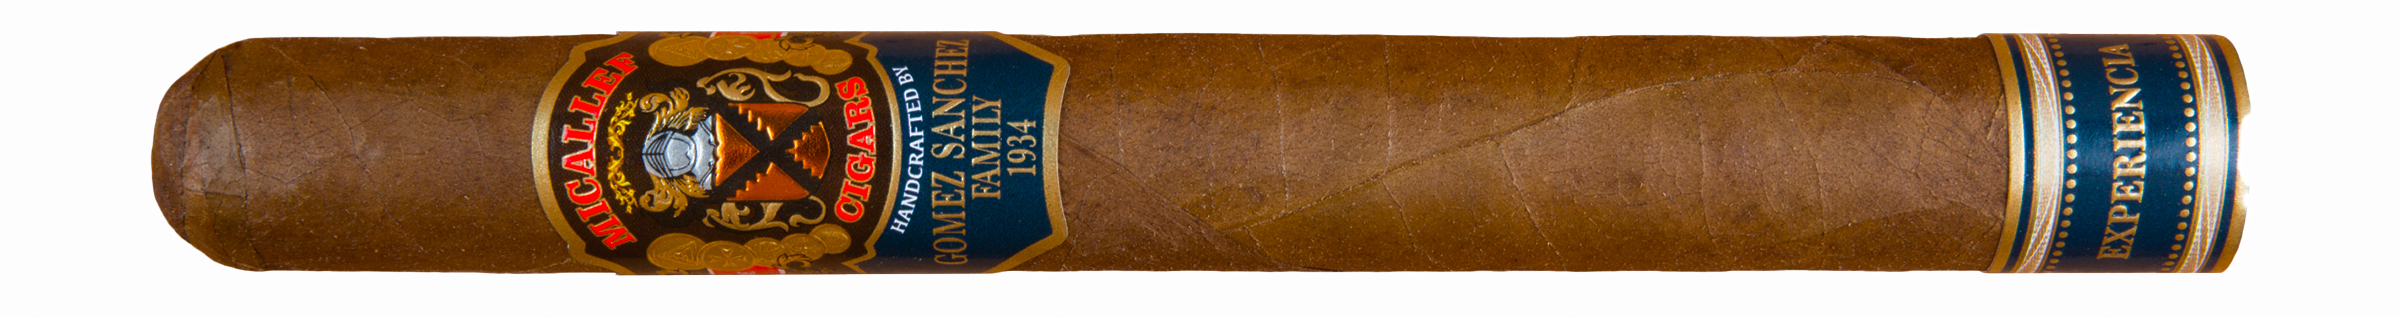 A cigar with Micallef Experiencia label